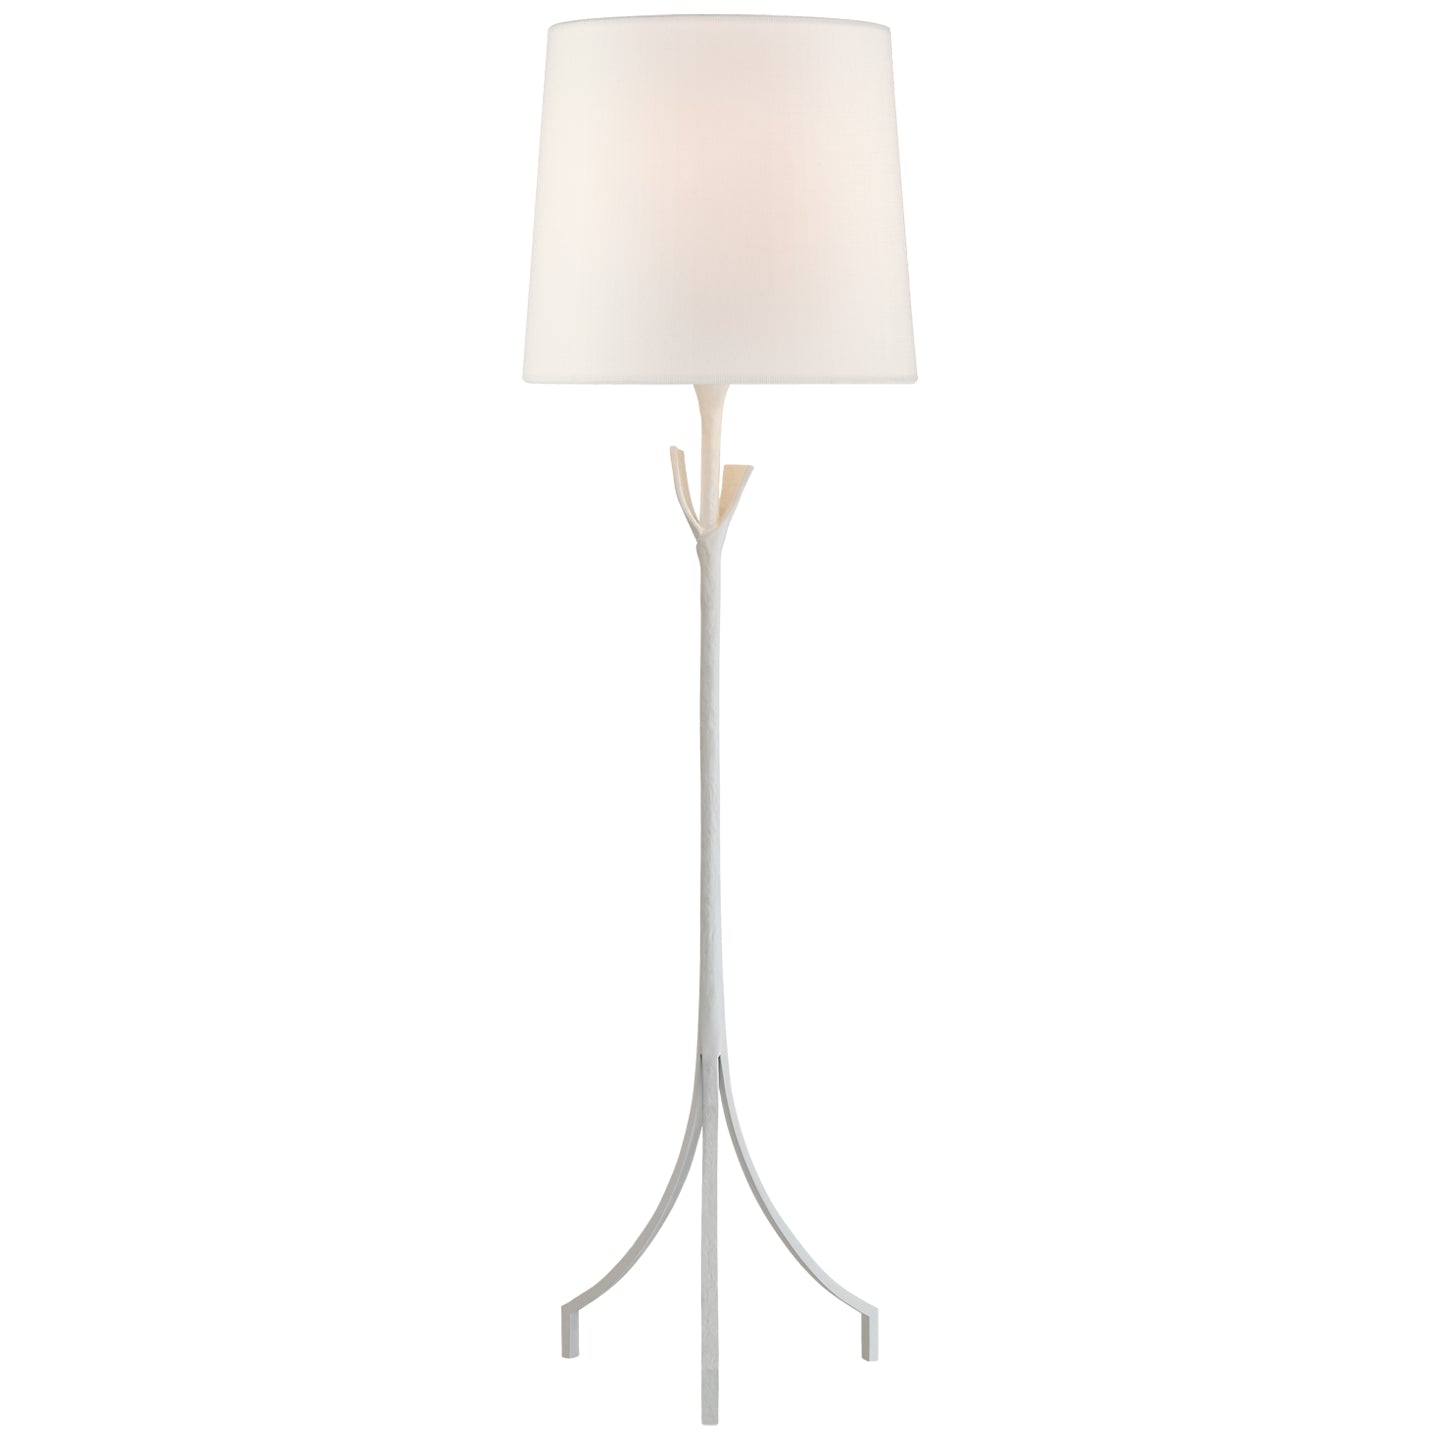 Load image into Gallery viewer, Visual Comfort Signature - ARN 1080PW-L - One Light Floor Lamp - Fliana - Plaster White
